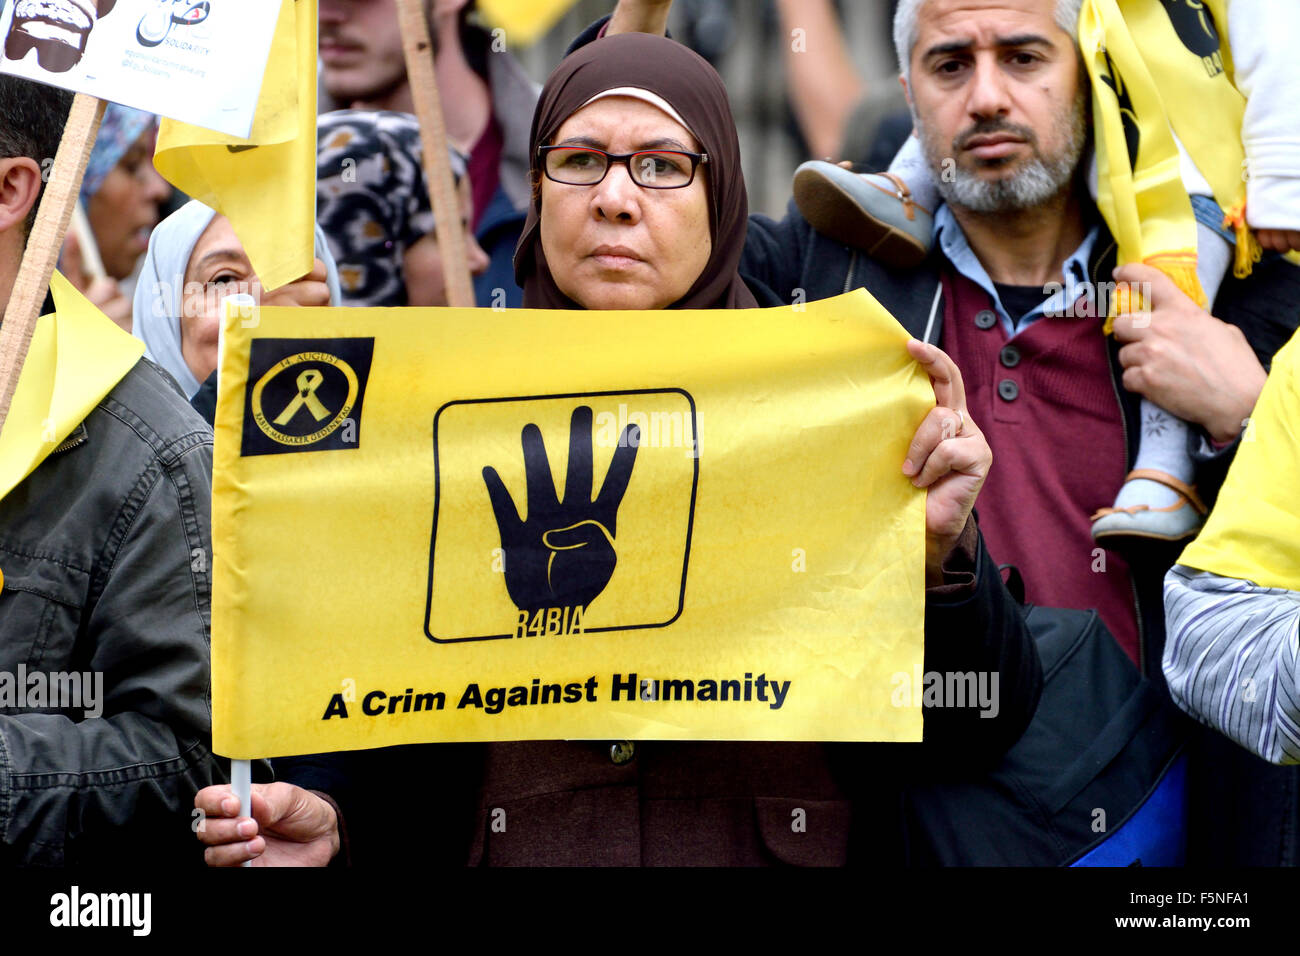 Spelling mistake on a banner - 'crim' instead of 'crime' - produced by a German organisation for Egyptian Demonstrators.... Stock Photo